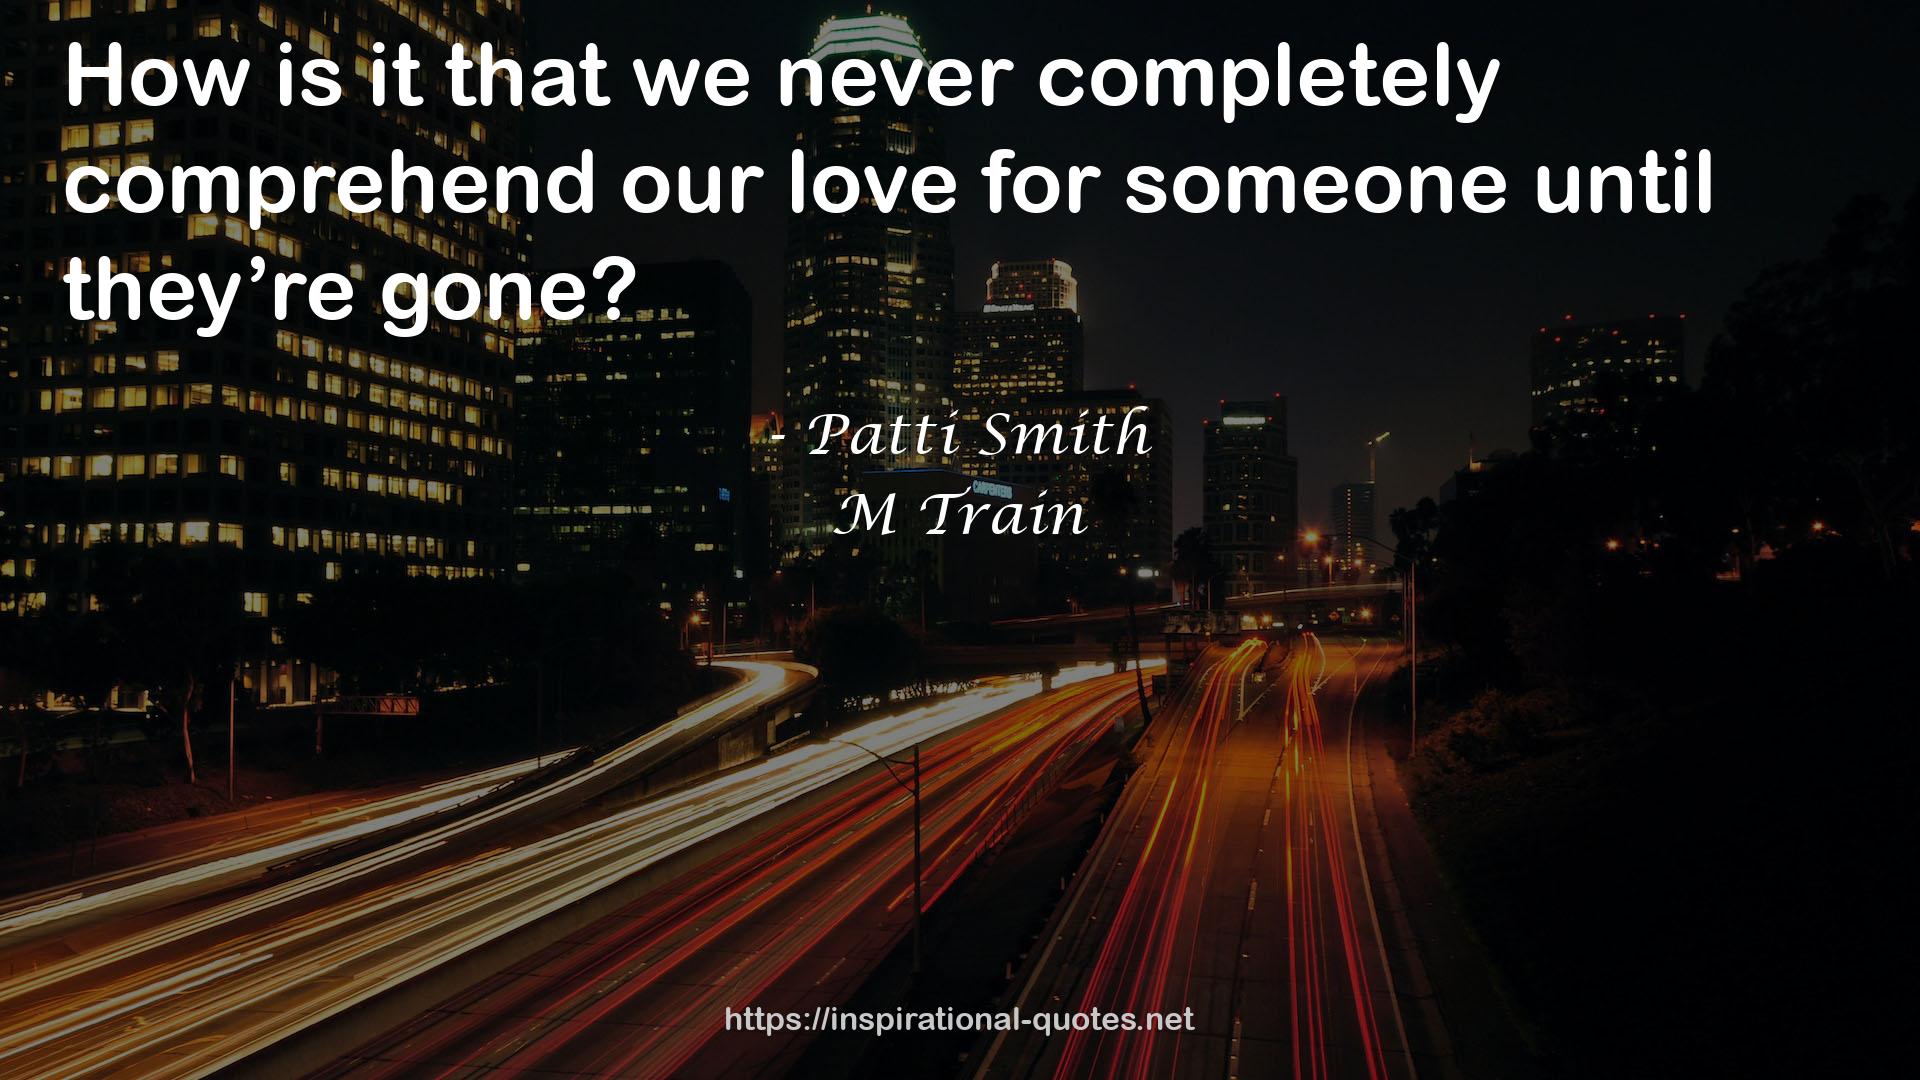 Patti Smith quote : How is it that we never completely comprehend our love for someone until they’re gone?